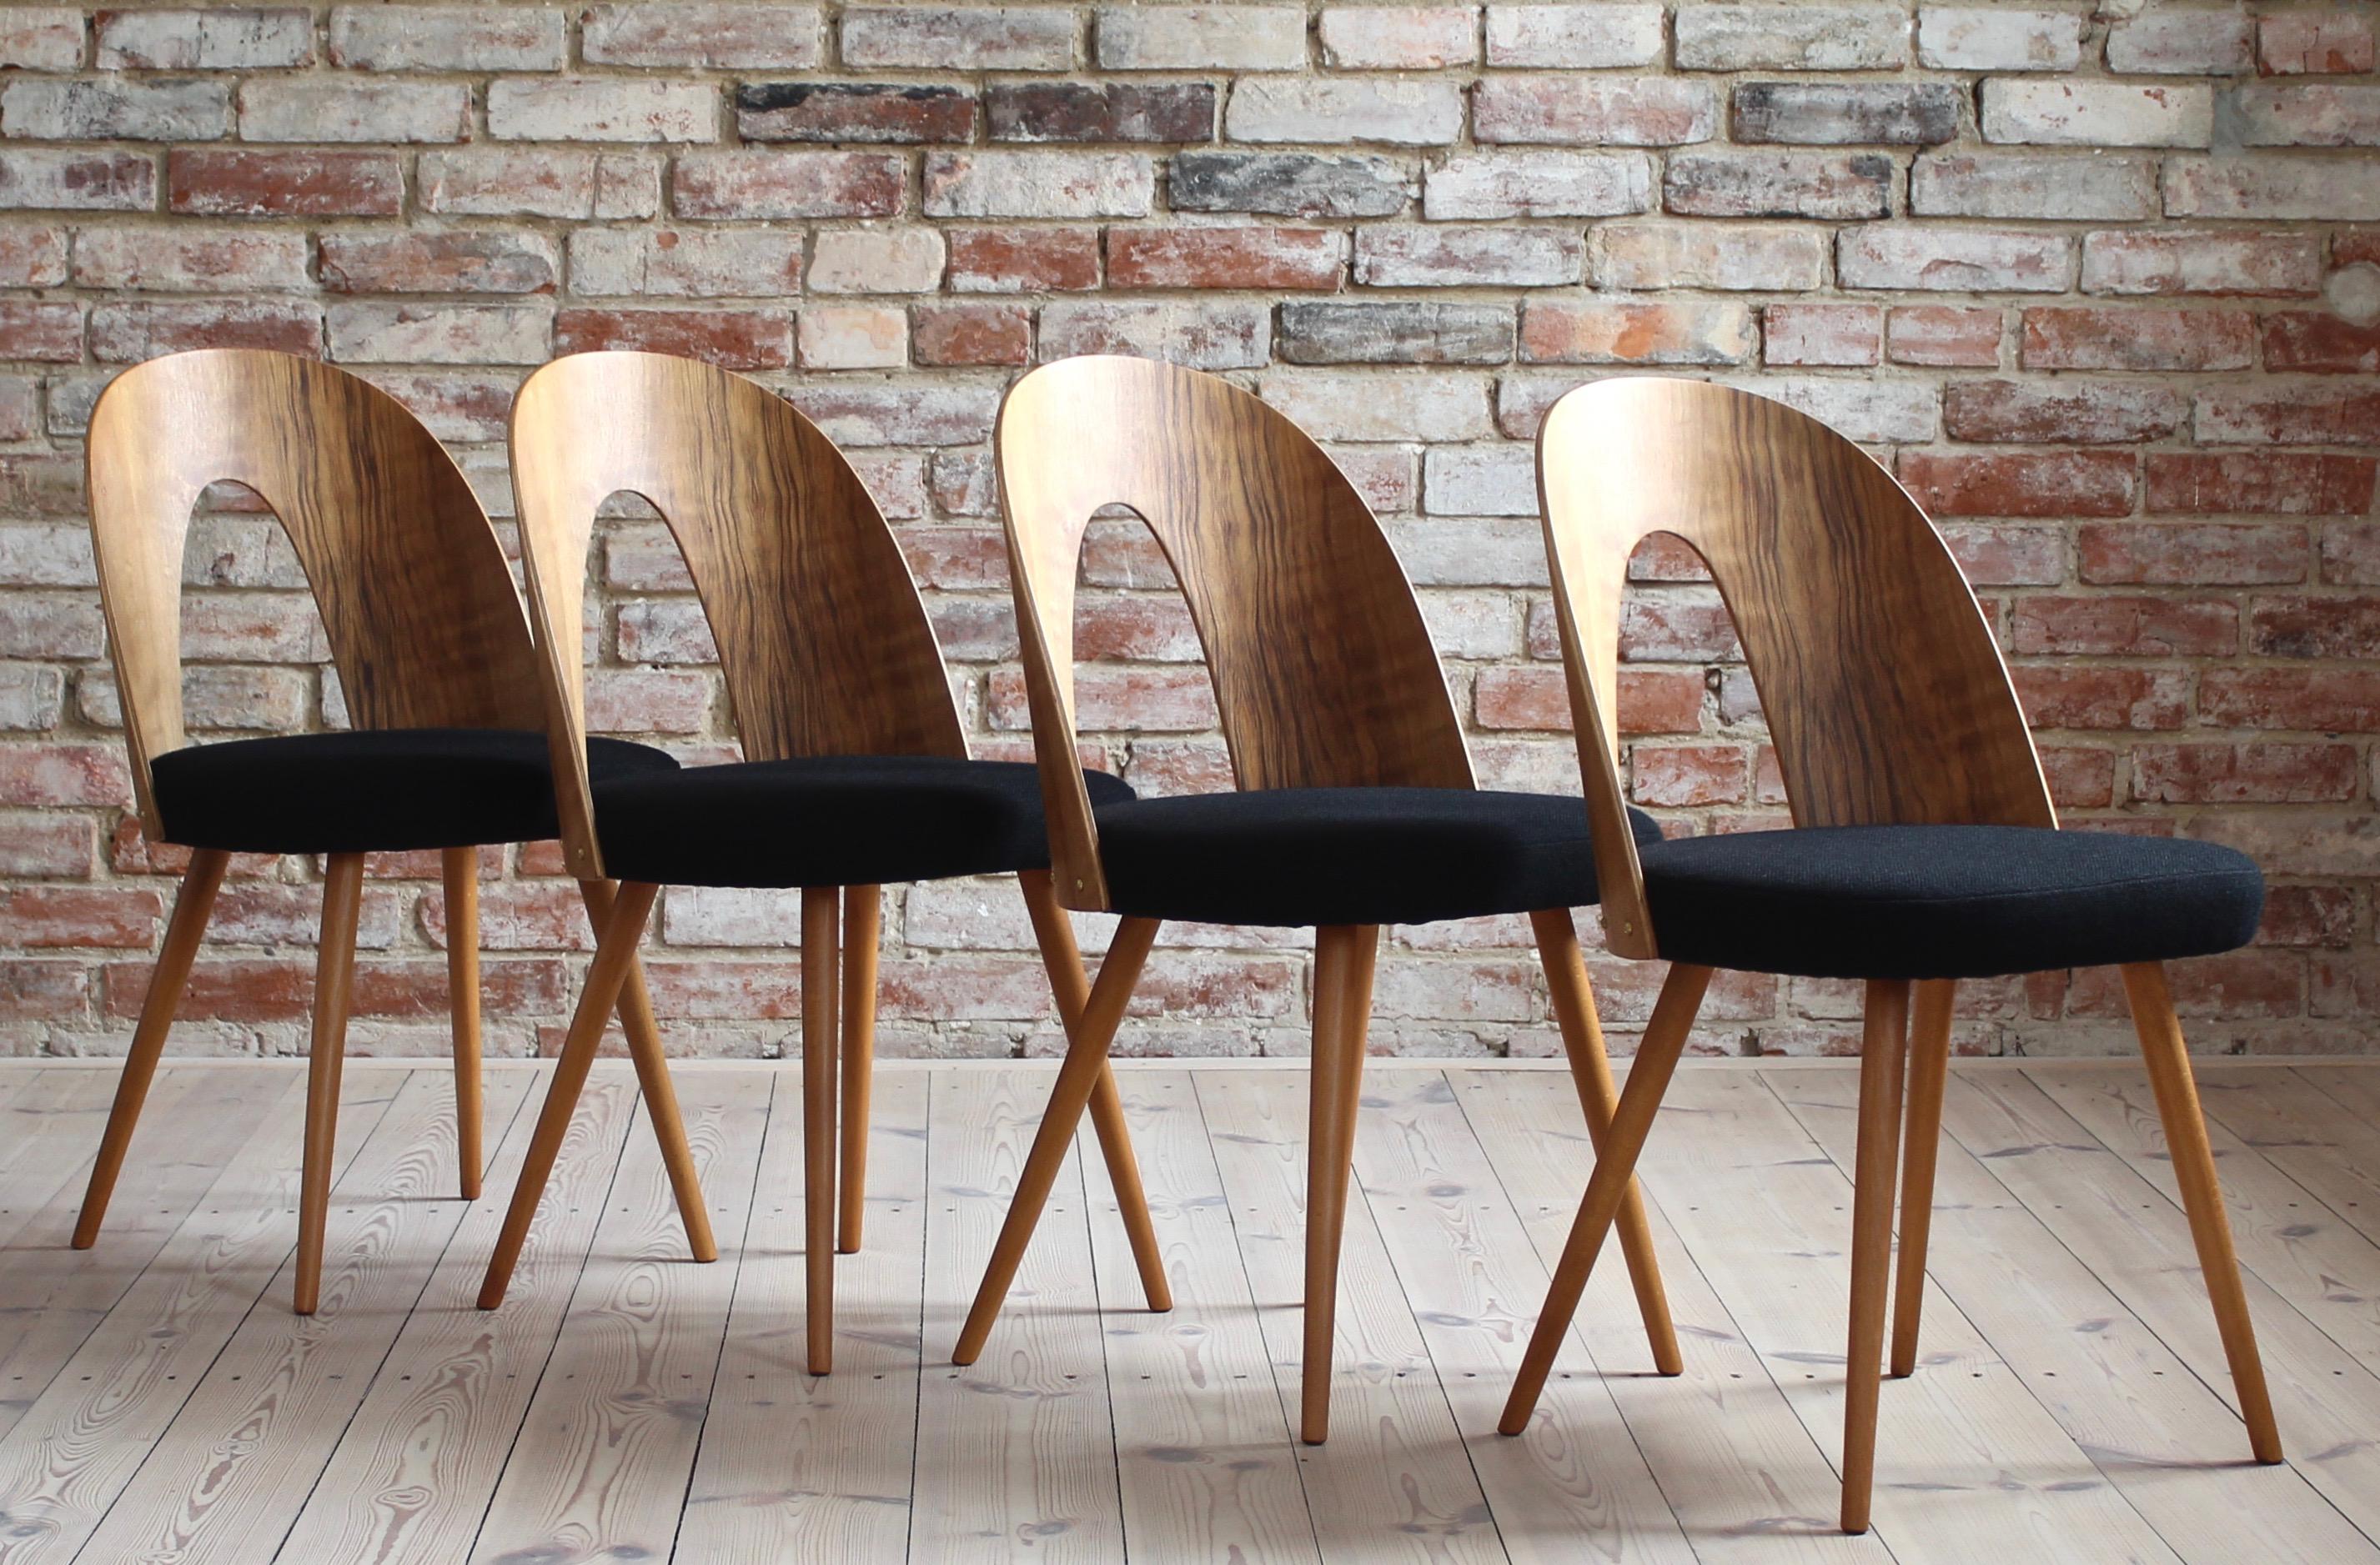 This set of four vintage dining chairs was designed by Czech designer Antonin Šuman in the 1960s. Produced by Mier Topolcany. The chairs have been completely restored finished with natural oil that gave it a natural and warm look. The set is